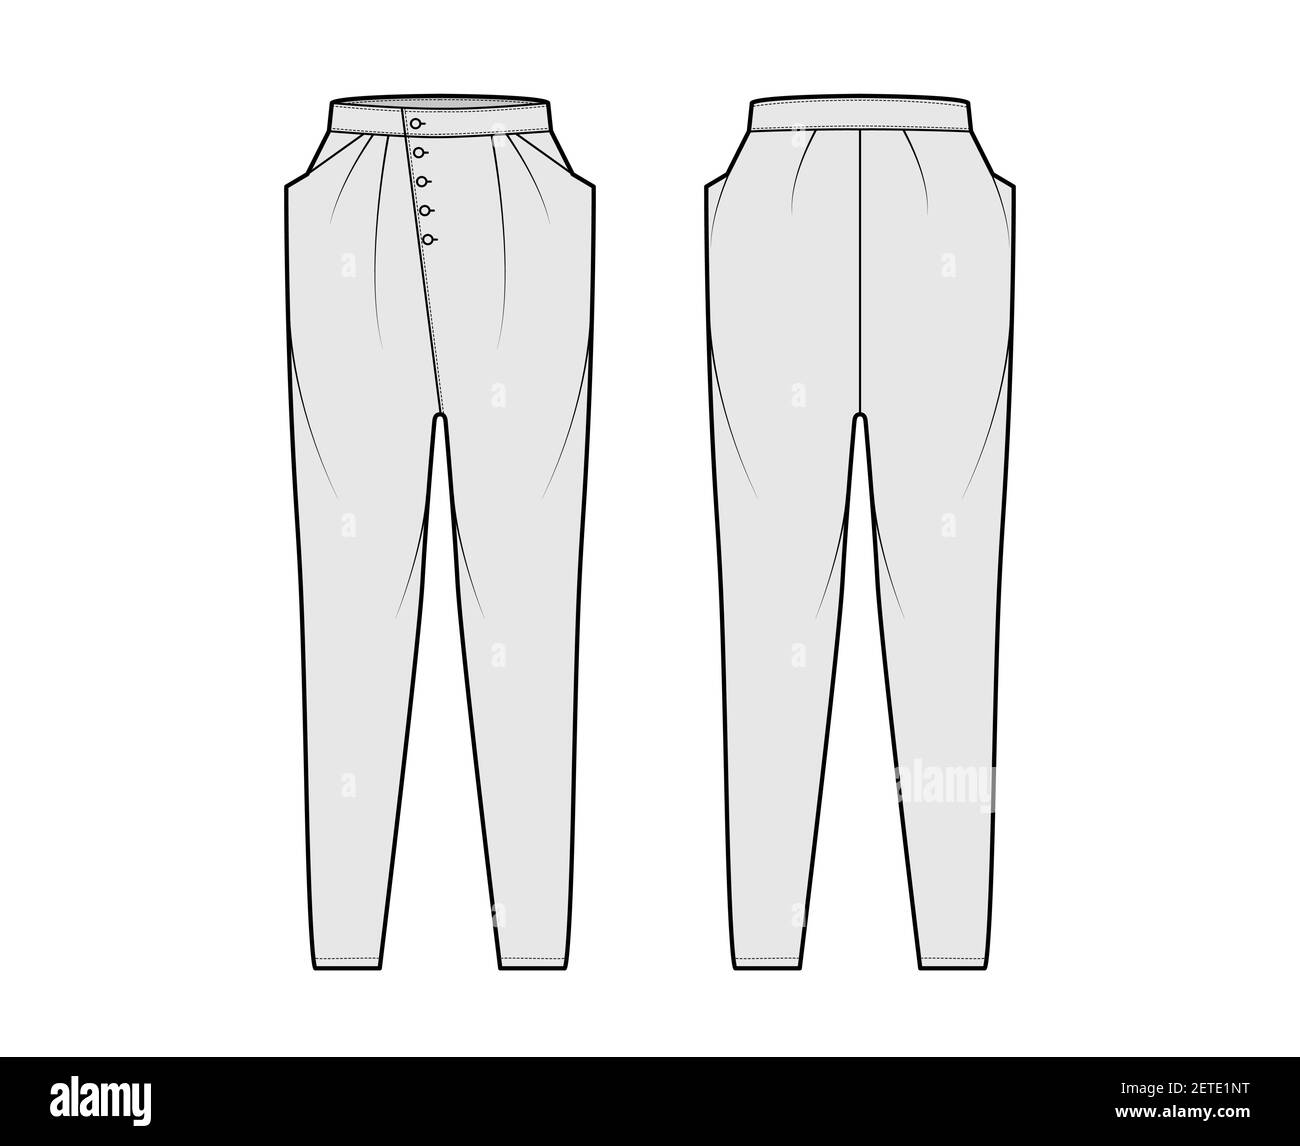 Tapered Baggy pants technical fashion illustration with normal waist, high  rise, slash pockets, draping front, full lengths. Flat apparel template  back, white, grey color style. Women, men, unisex CAD Stock Vector Image